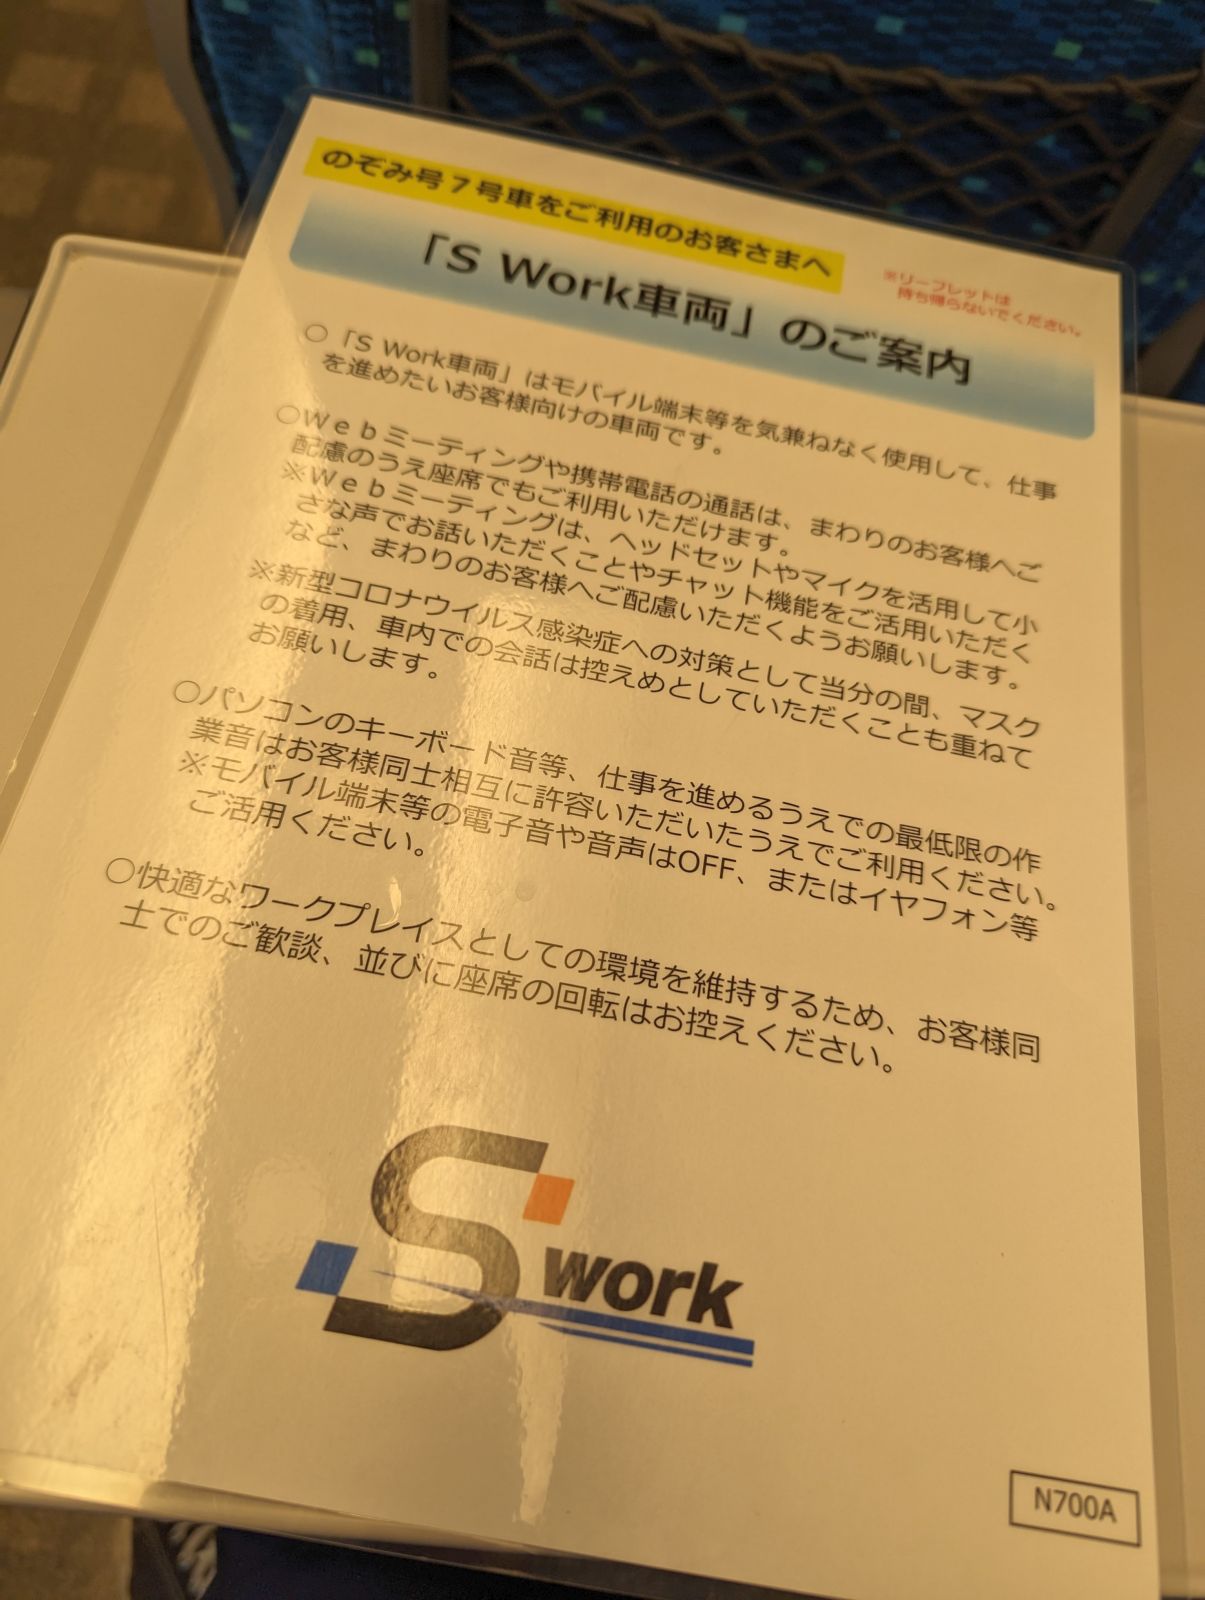 「S Work車両」のご案内